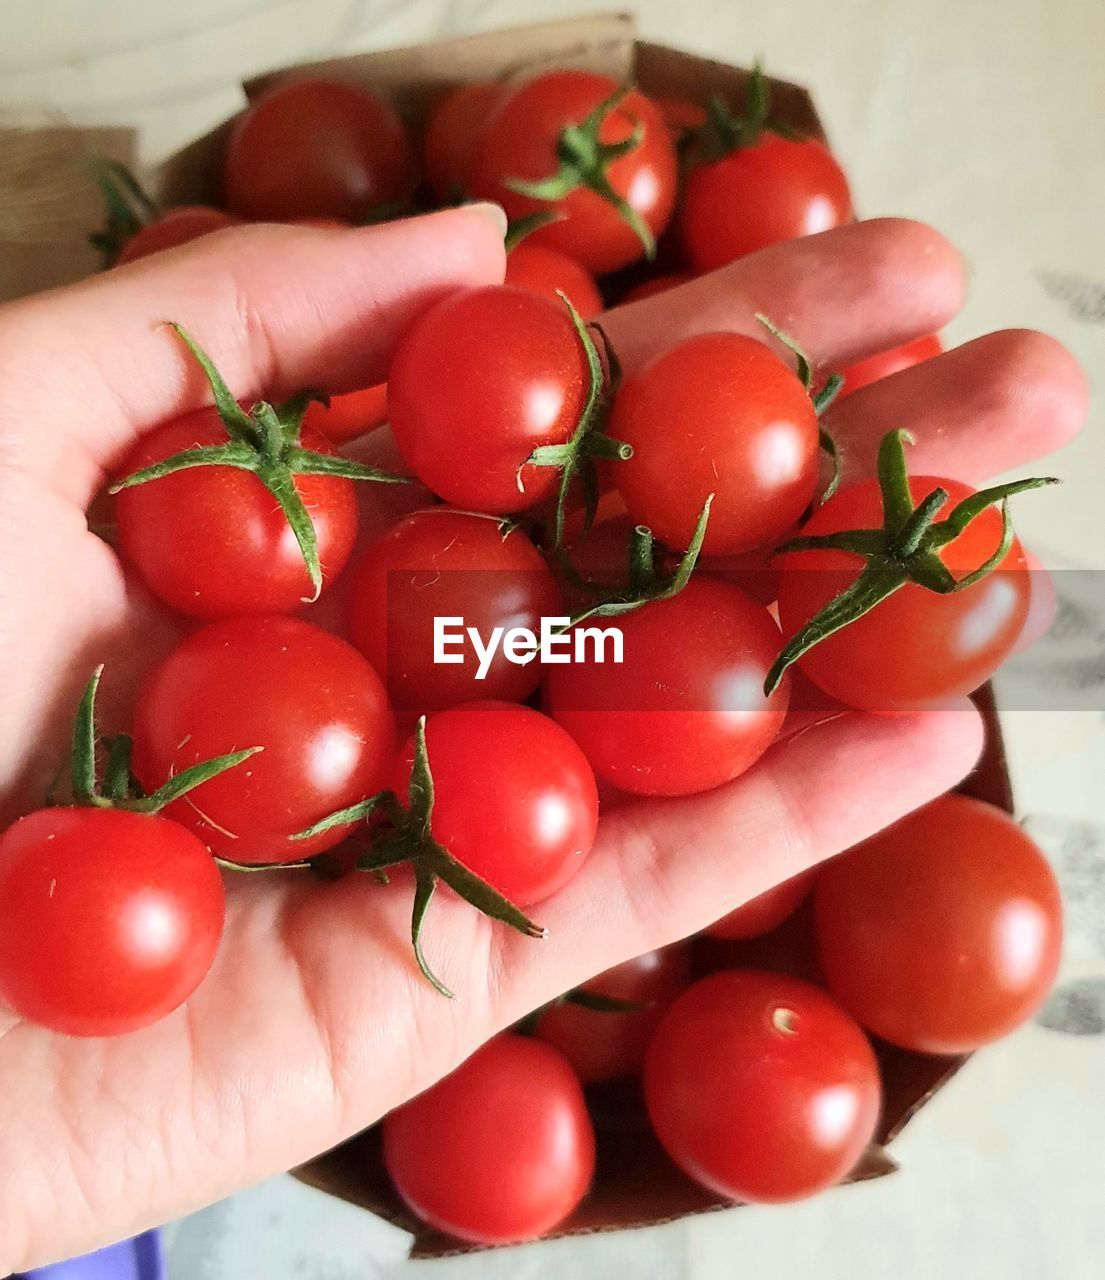 food, tomato, food and drink, hand, red, healthy eating, freshness, fruit, produce, wellbeing, holding, vegetable, plant, one person, plum tomato, close-up, indoors, lifestyles, finger, large group of objects, organic, cherry tomato, juicy, high angle view, adult, nature